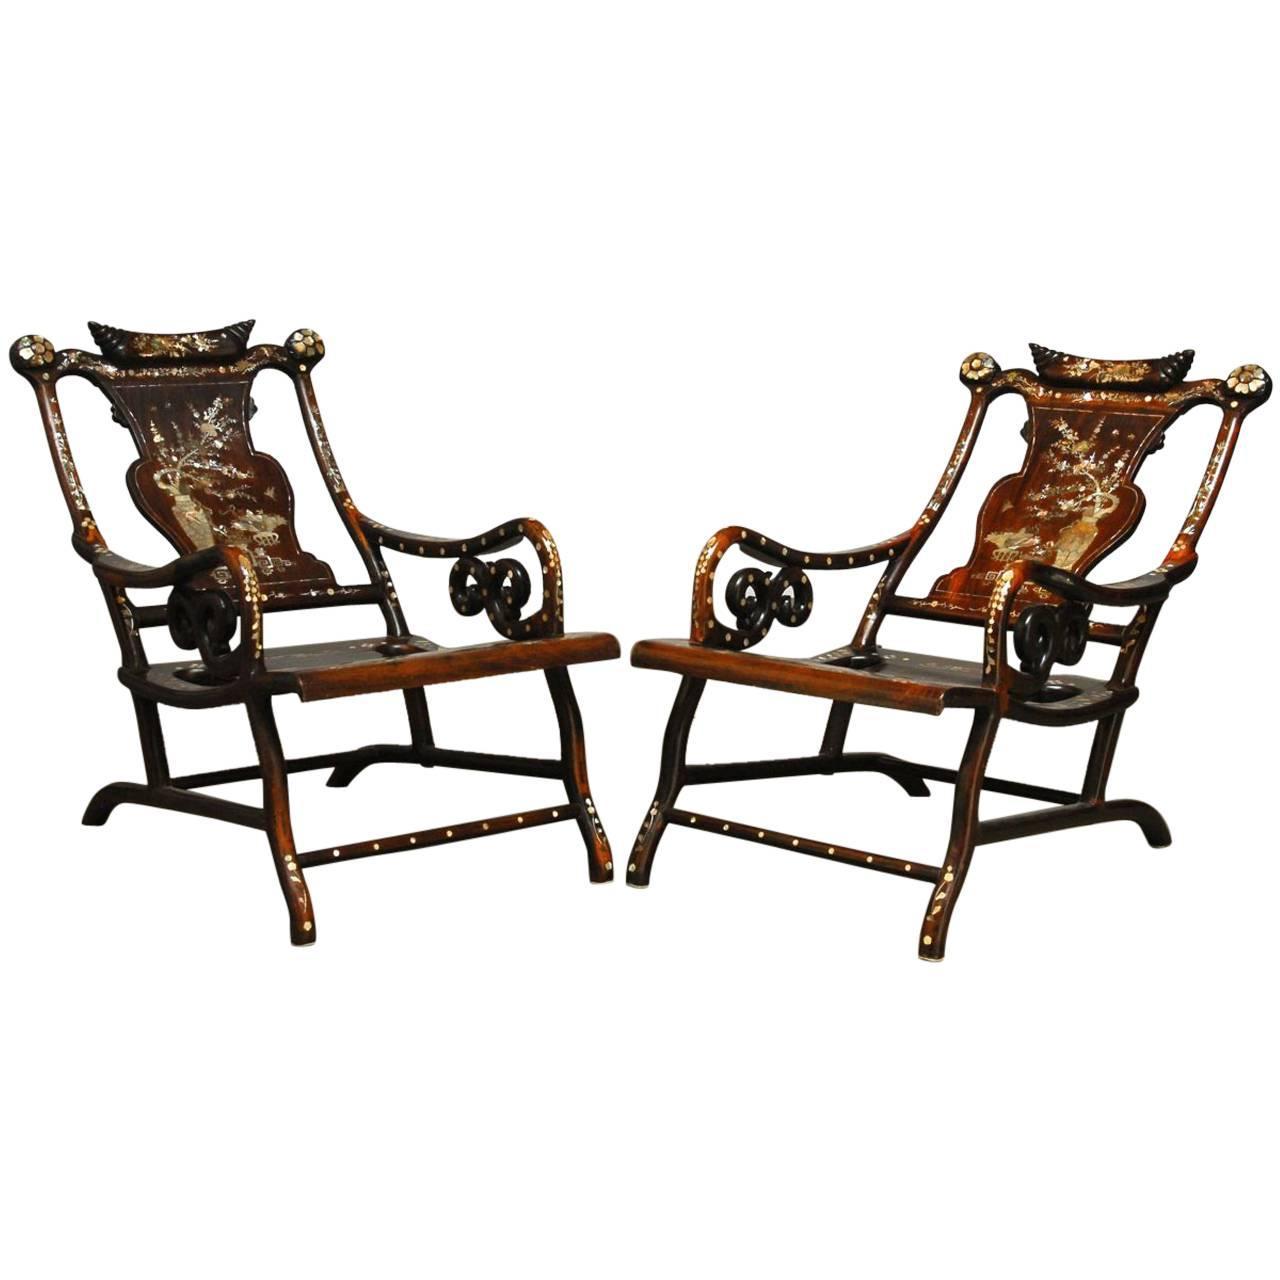 Pair Of Chinese Rosewood Lounge Chairs With Mother Of Pearl Inlay